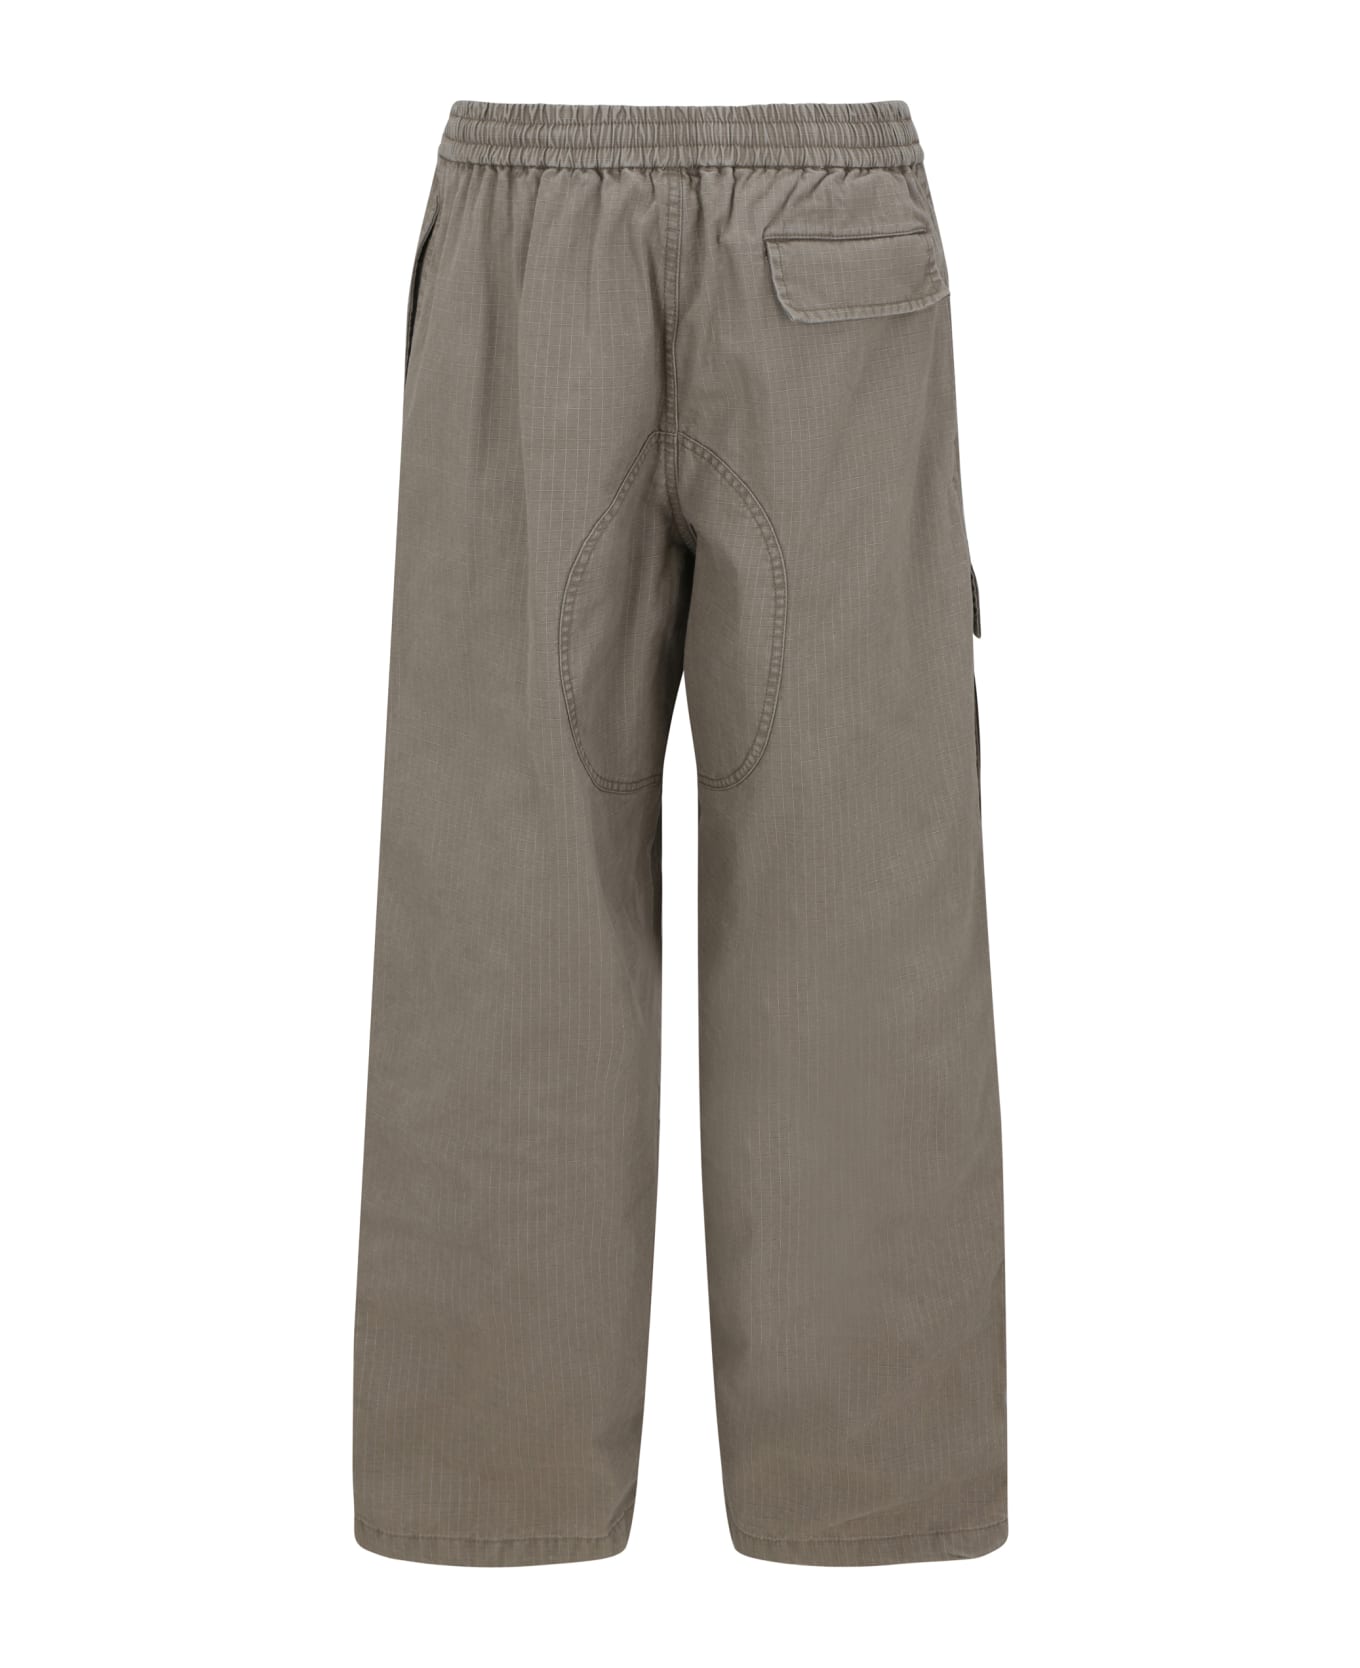 Acne Studios Logo Embroidered Mid-waist Pants - Cold Beige